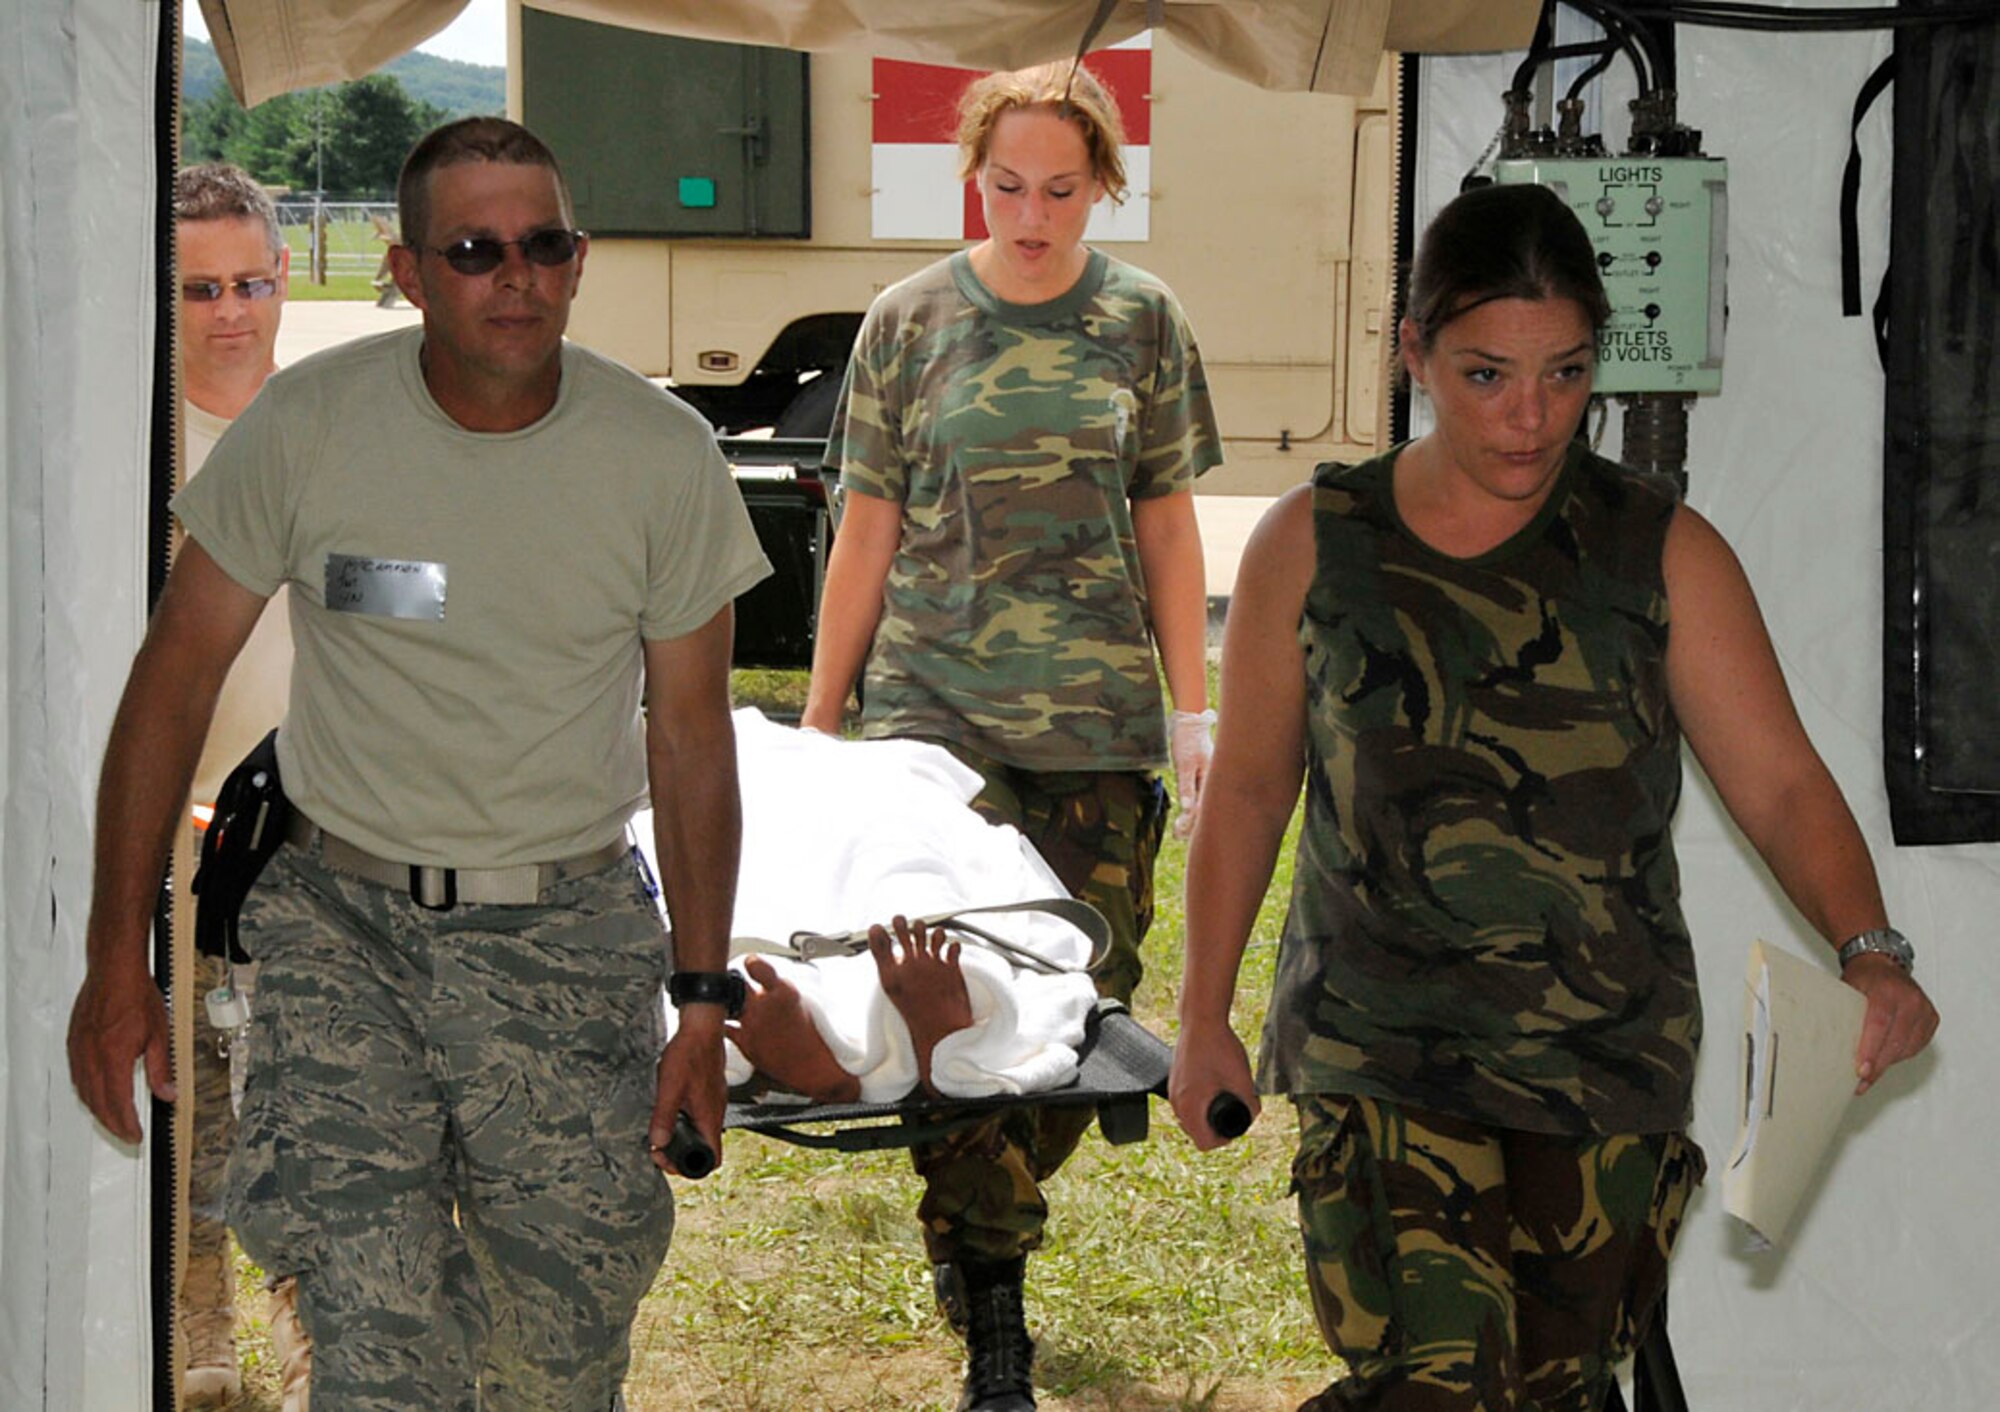 Tech. Sgt. McCammon (front left) and Tech. Sgt. Majors (back left) along with two Dutch Medics transport victim to staging area. Photo by Senior Master Sgt. John Chapman
